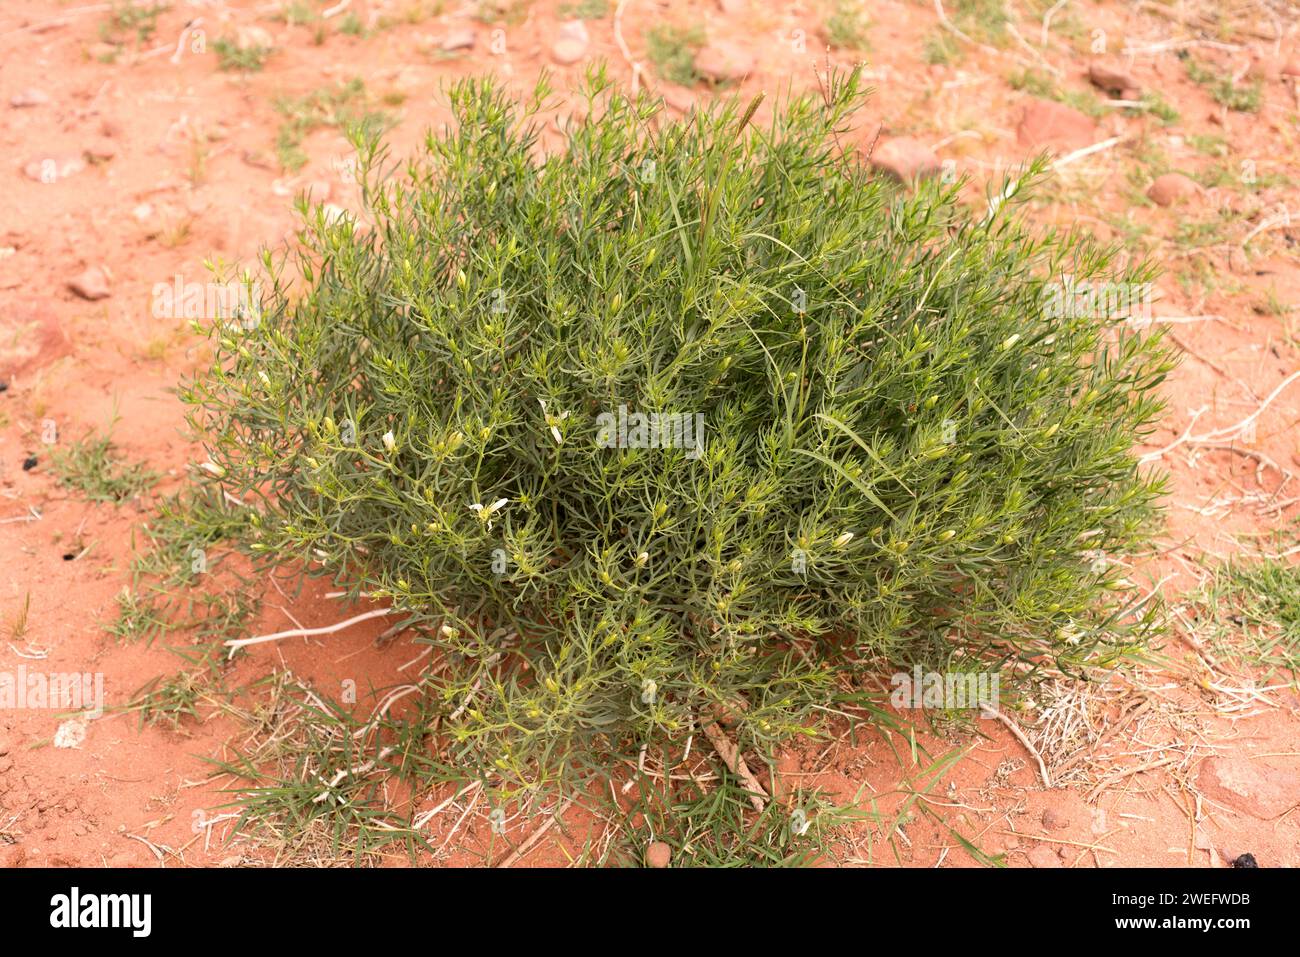 Syrian rue (Peganum harmala) is a perennial medicinal herb native to eastern Spain, north Africa and Asia from Turkey to China. This photo was taken i Stock Photo